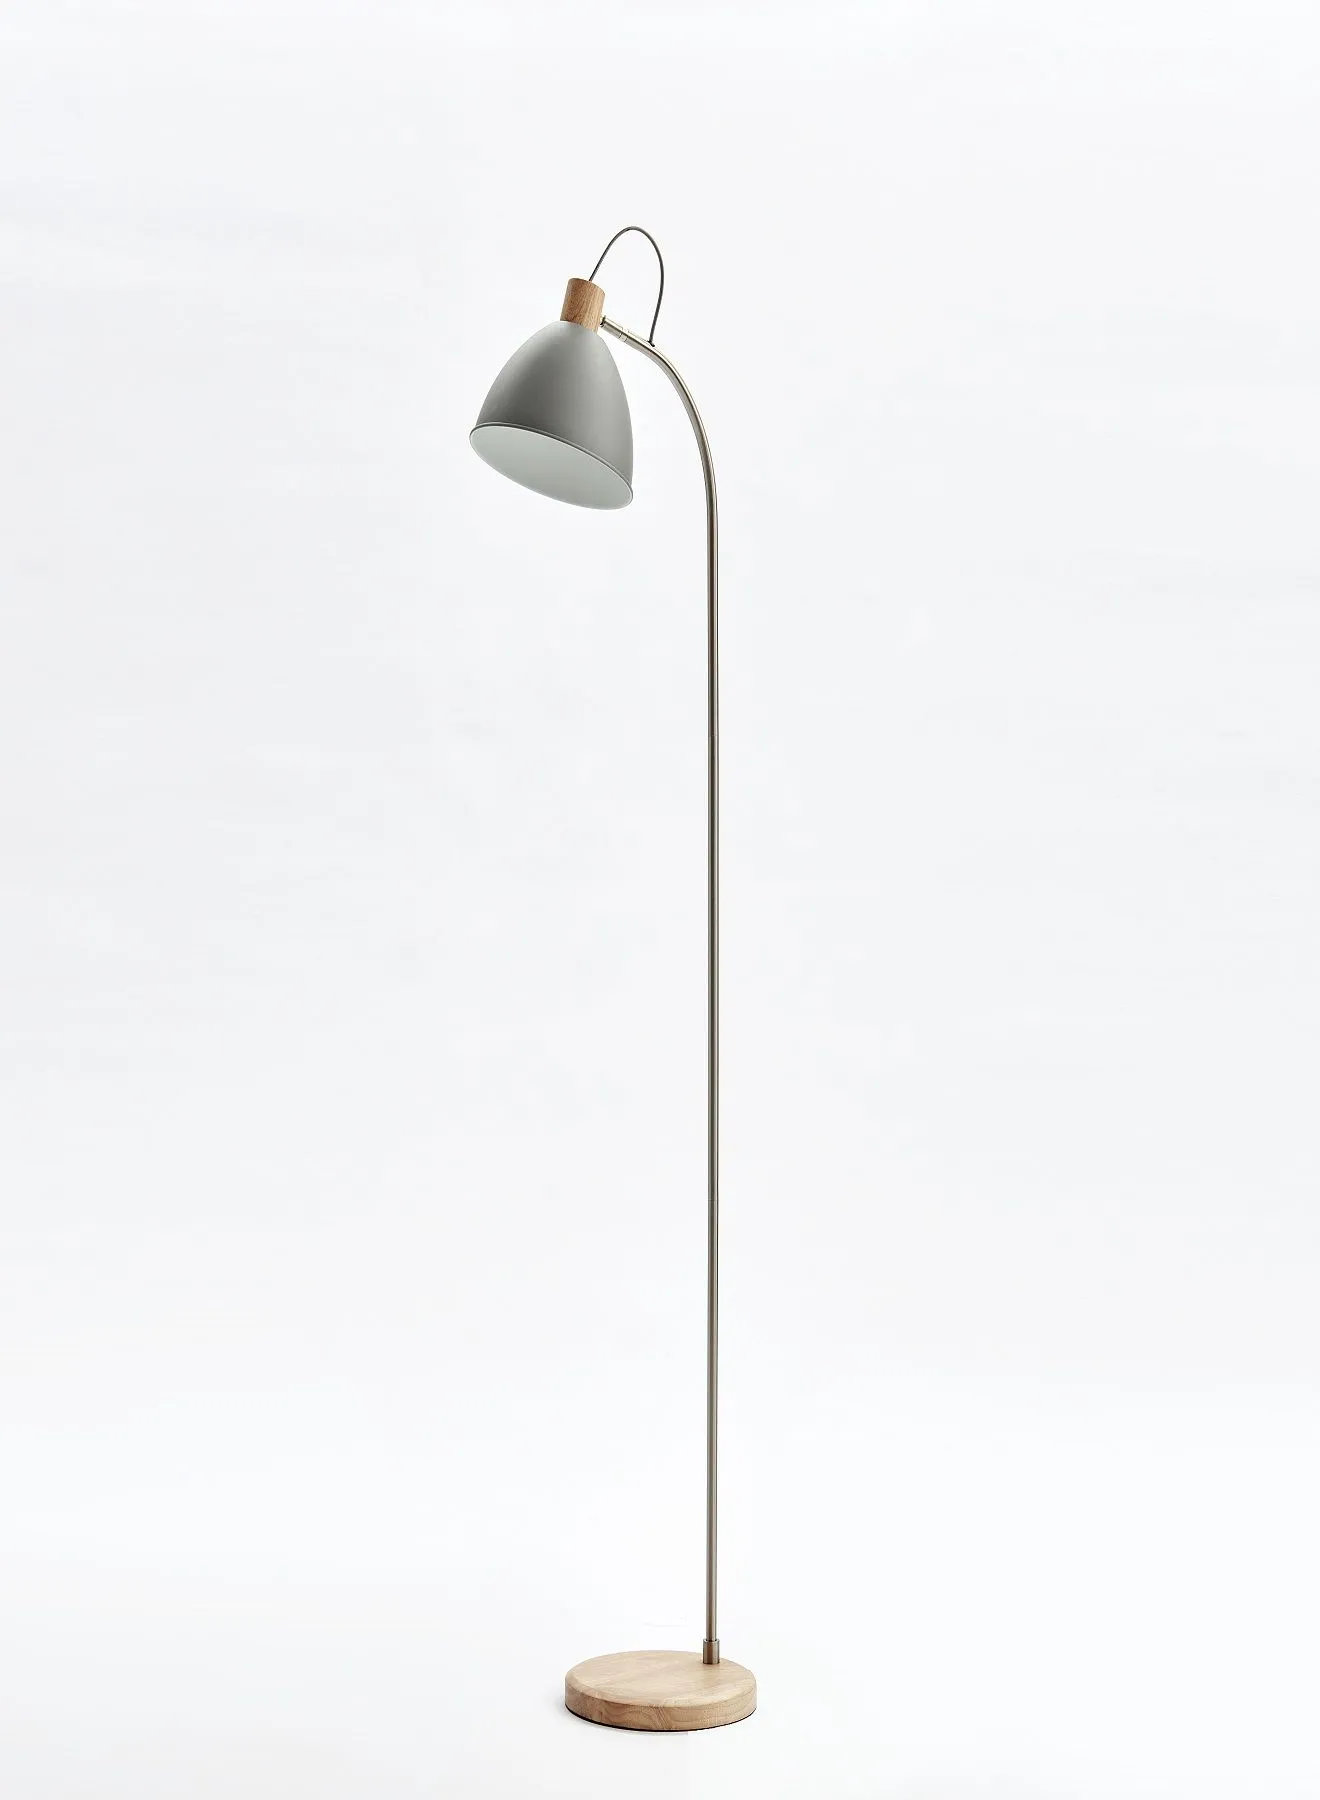 Switch Modern Decorative Floor Lamp Unique Luxury Quality Material For The Perfect Stylish Home FL533000 Grey/Brown 28 x 149cm